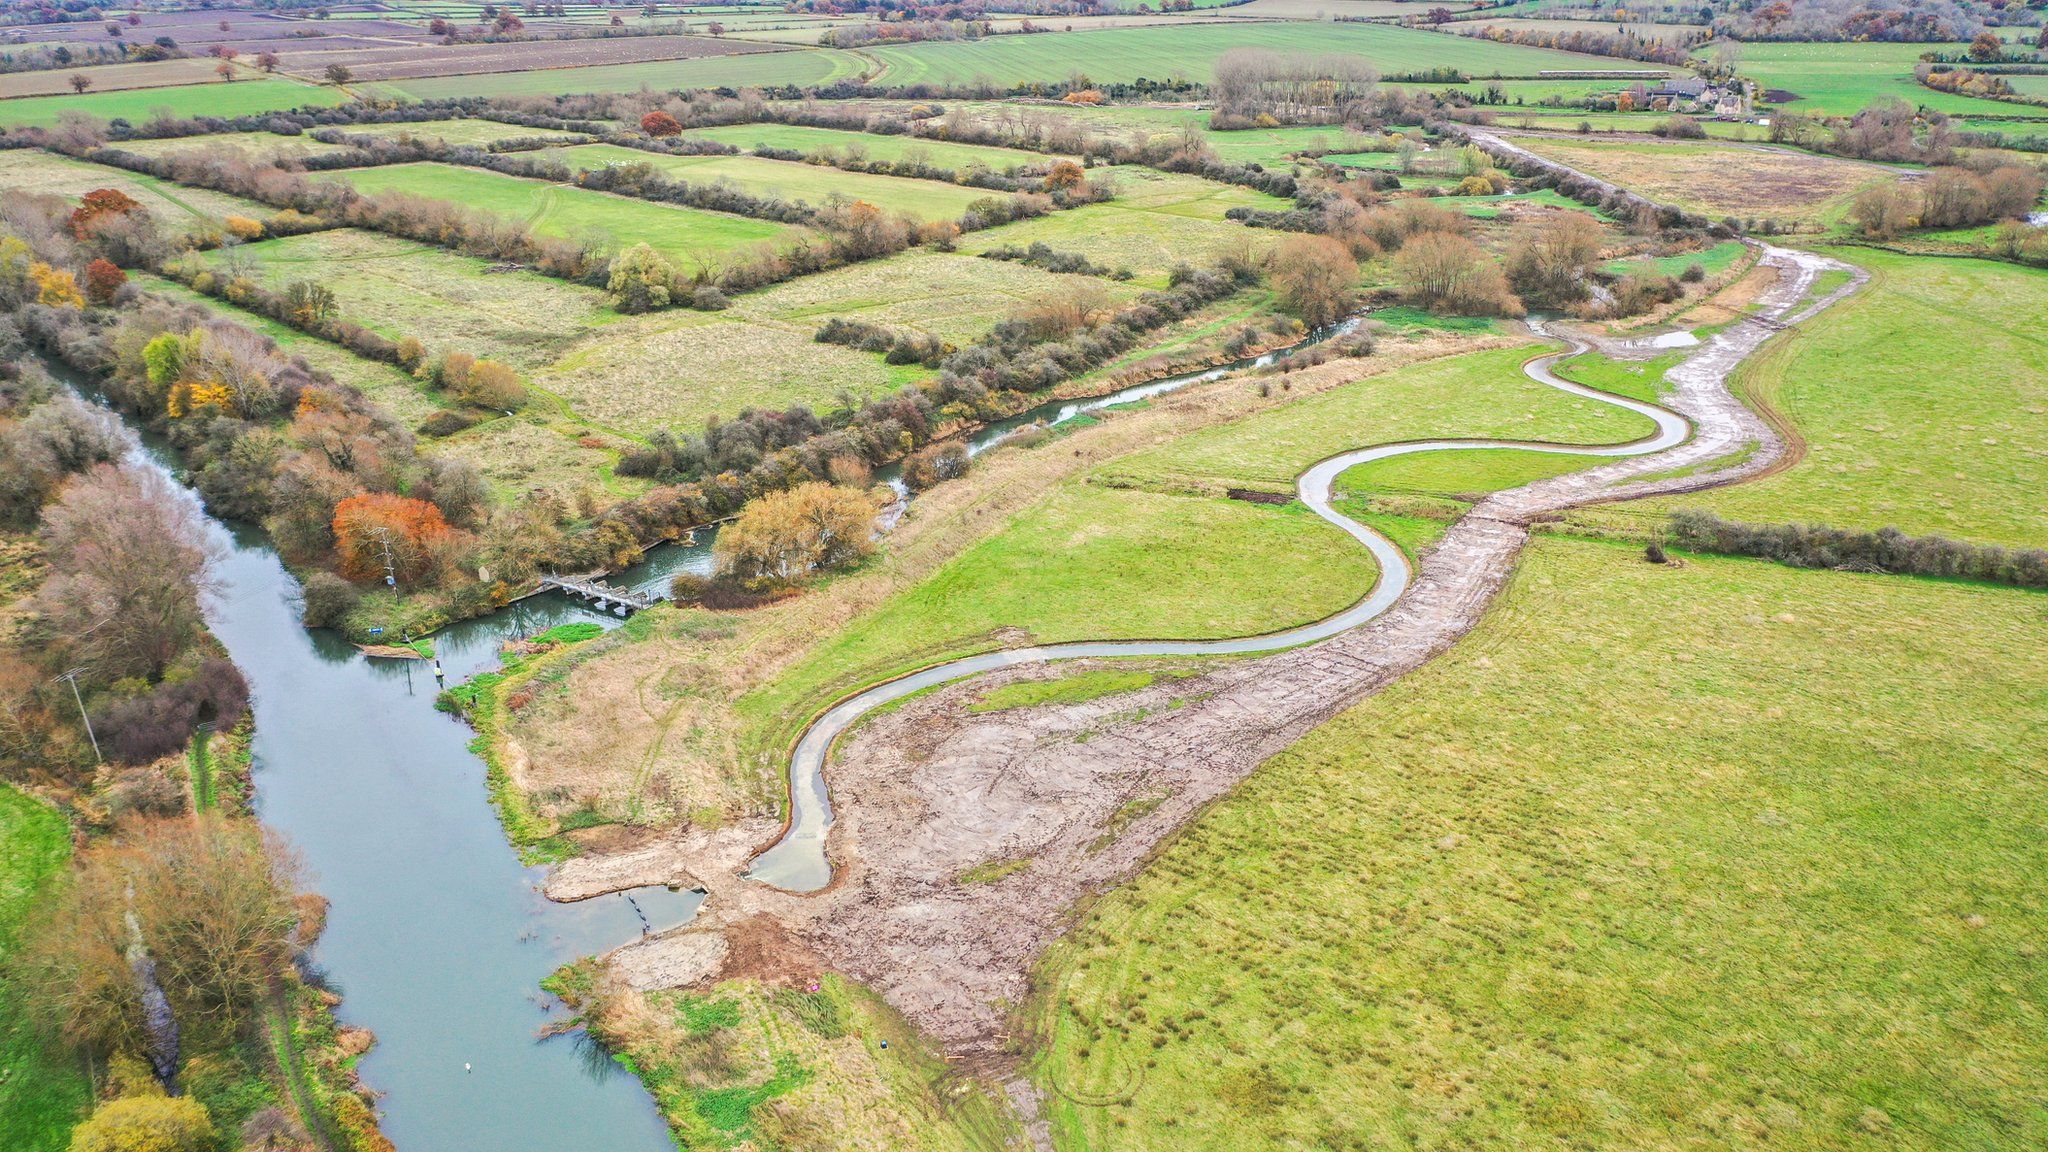 The new Thames channel at Chimney Meadows Nature Reserve